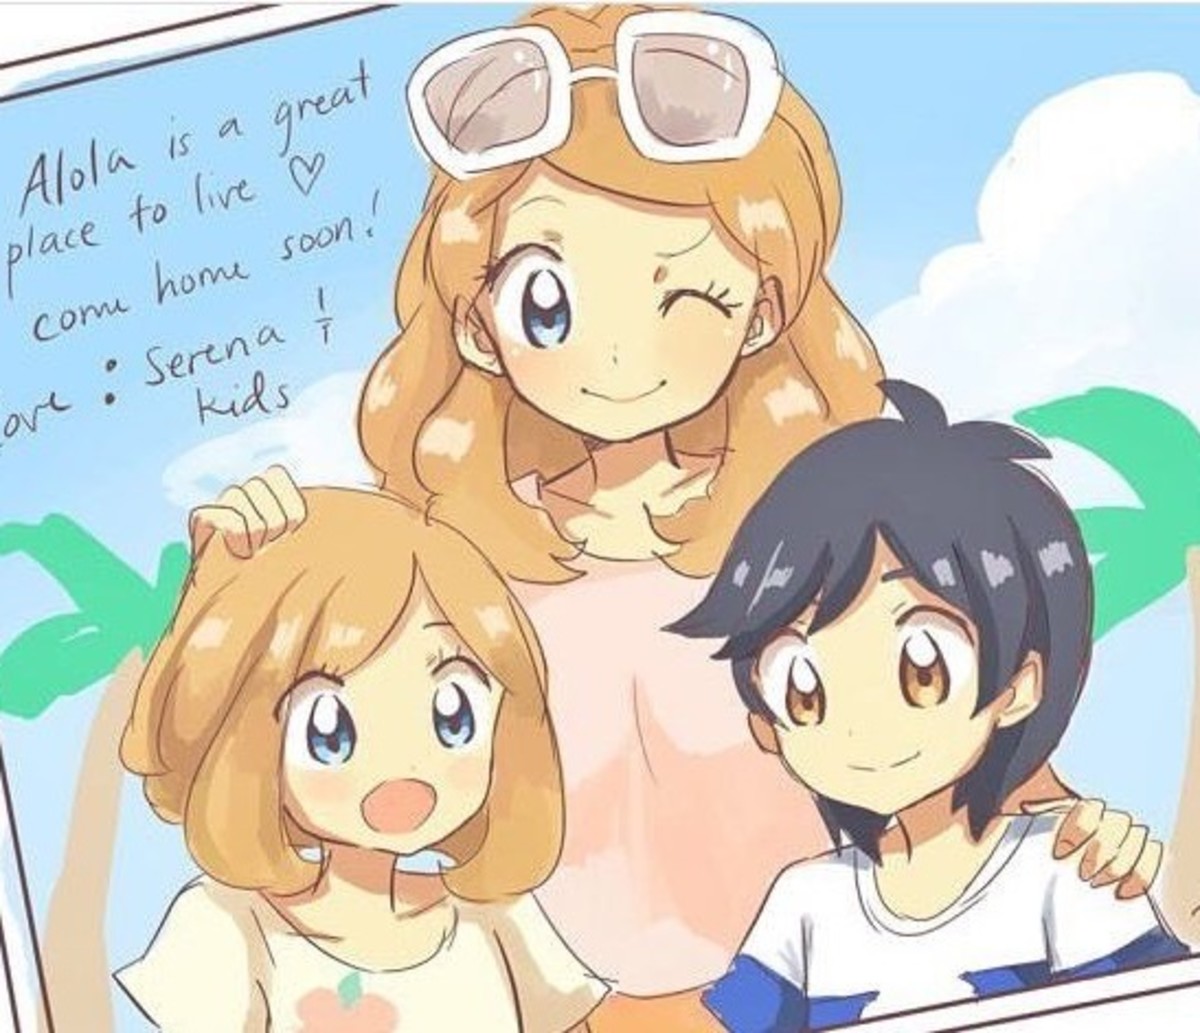 Fanart of Serena with her and Ash's children (the Alolan protagonists)